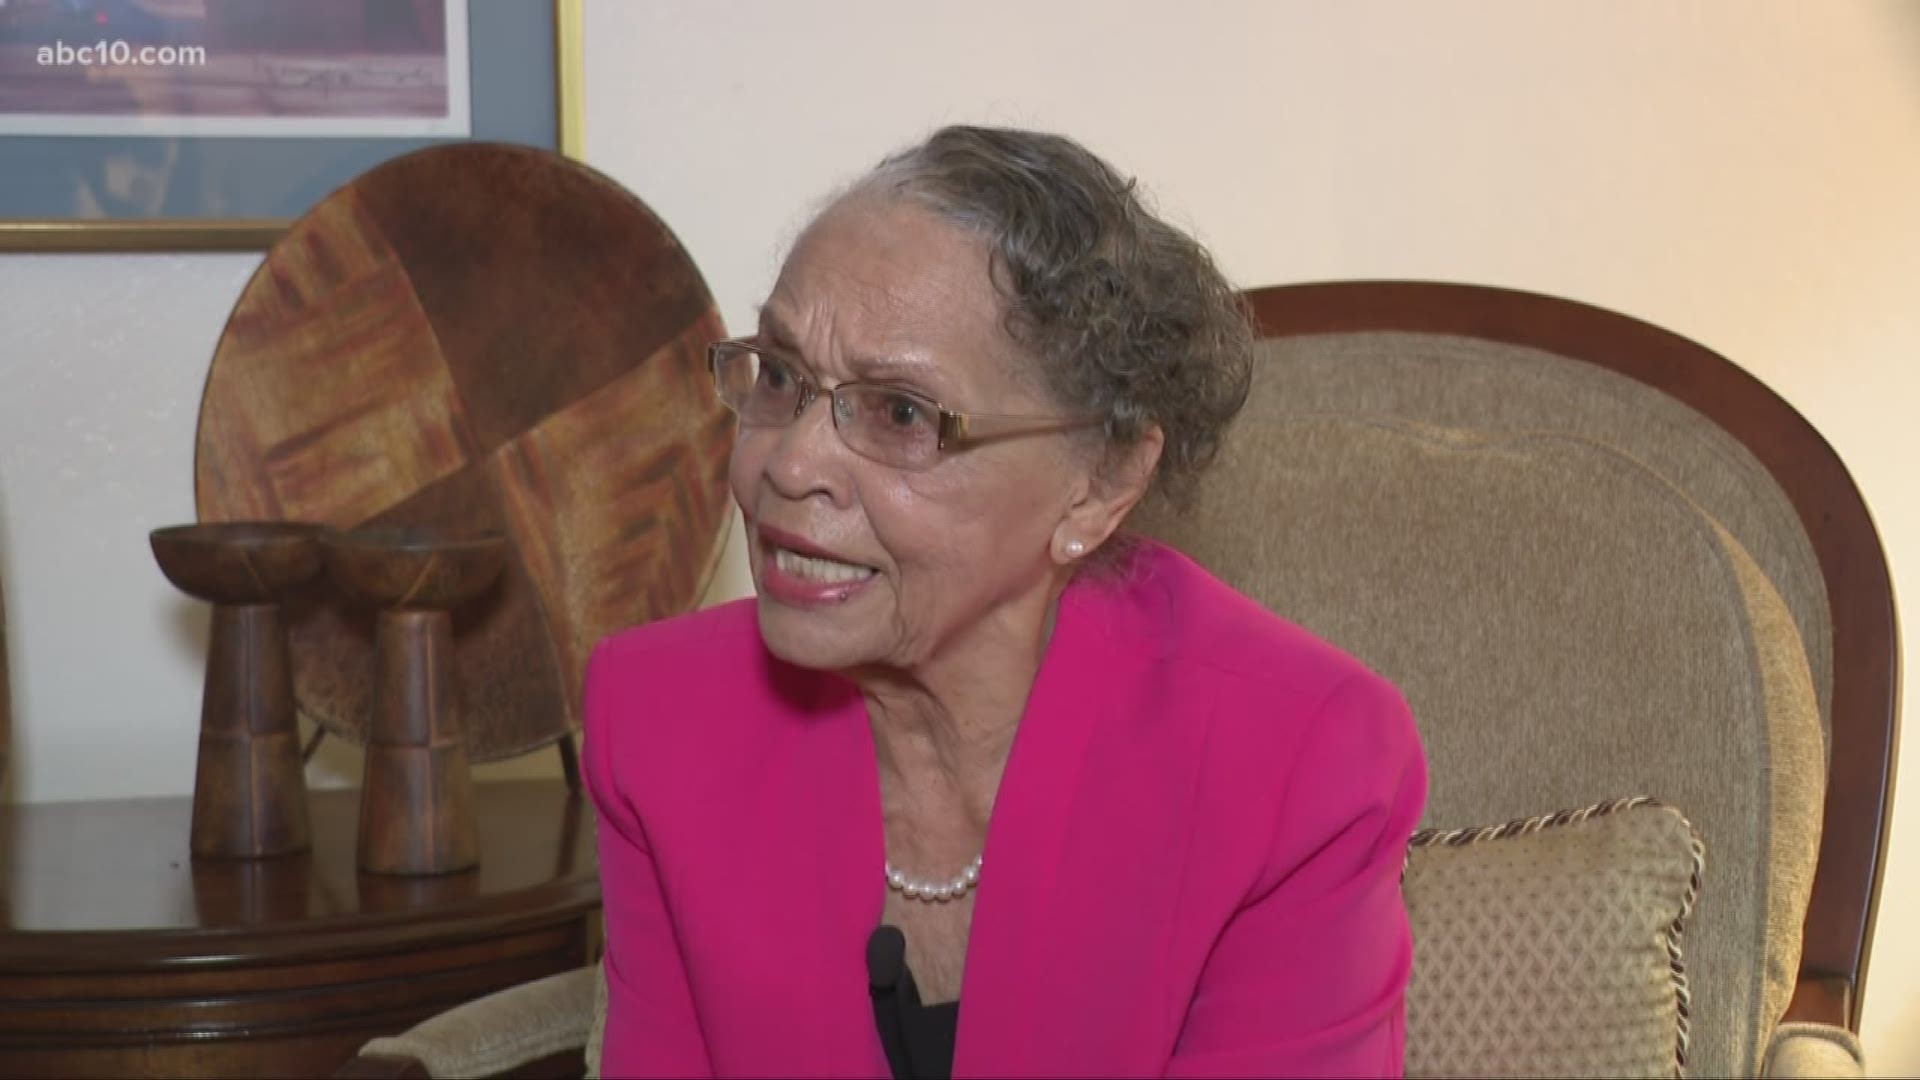 February is Black History Month and ABC10 is honoring trailblazers in our area. We start with the first black teacher in Elk Grove, Irene B West.